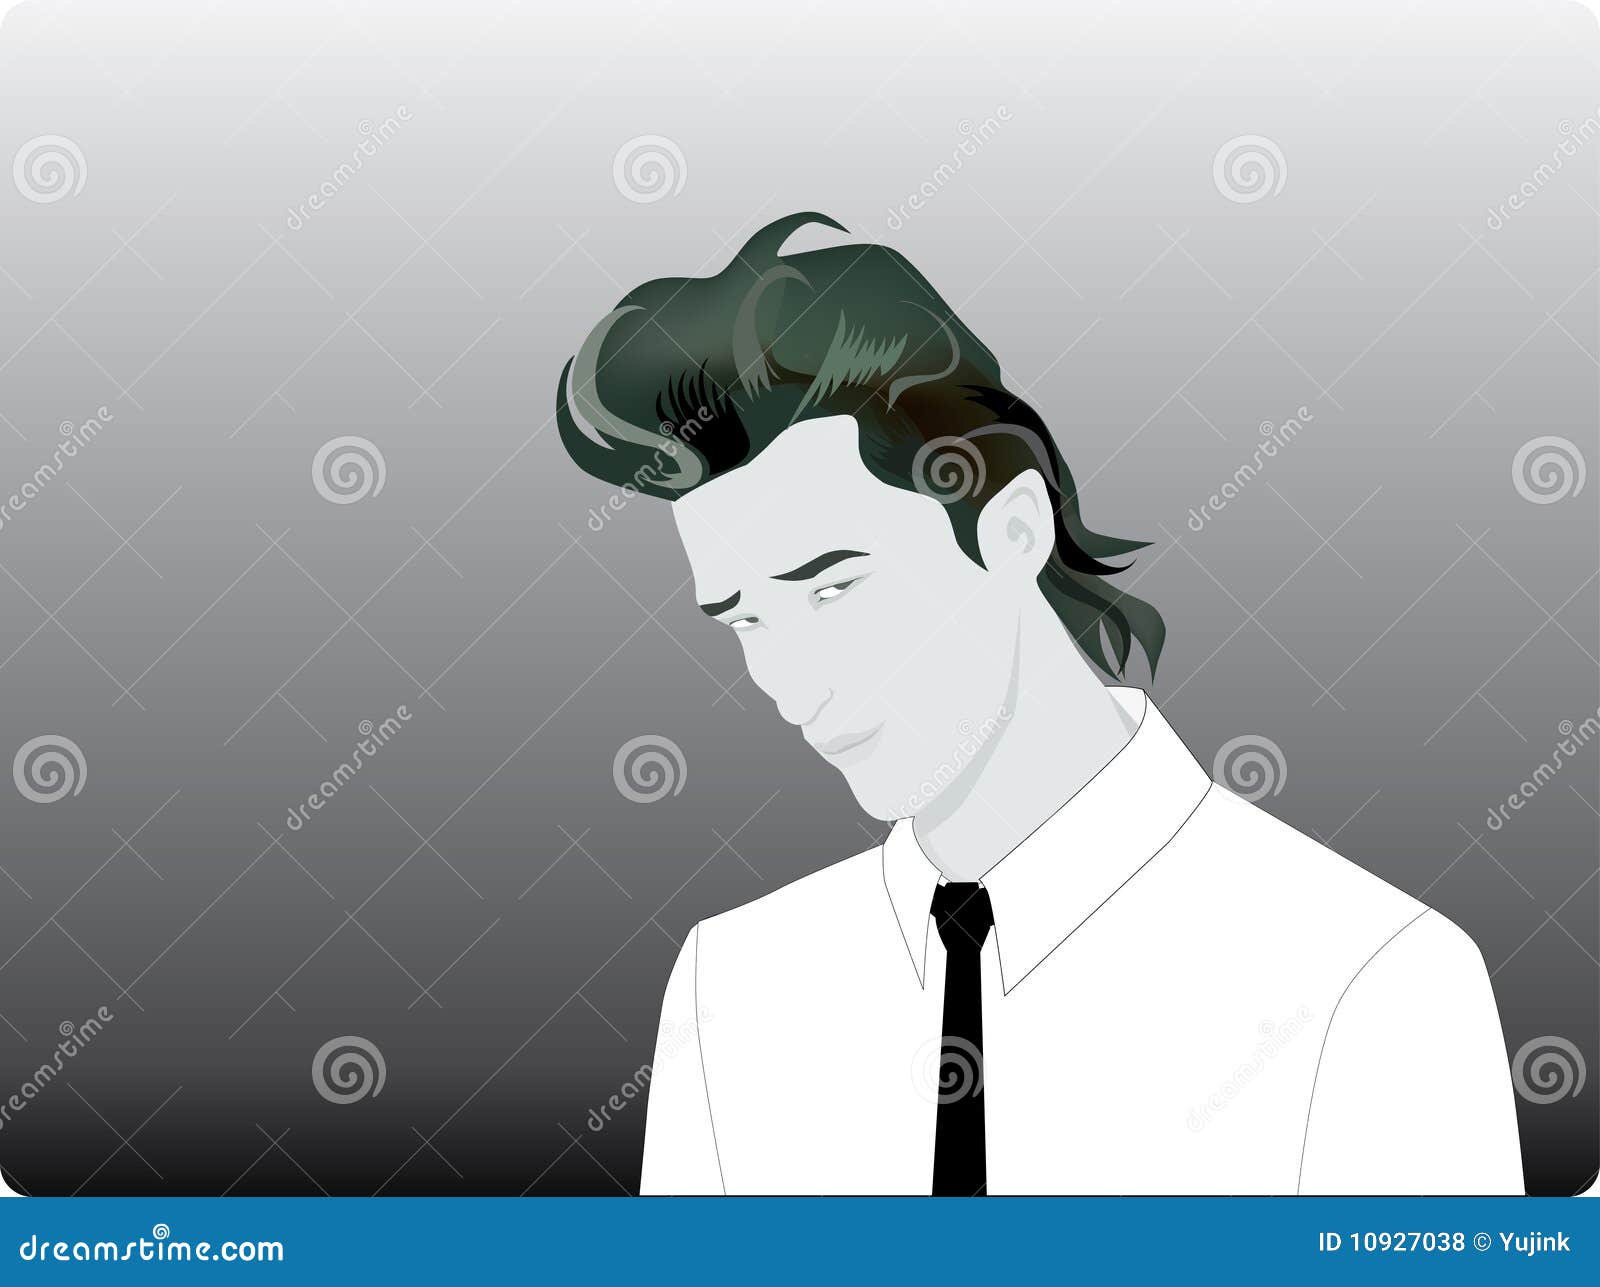 young business man with faux hawk hair style